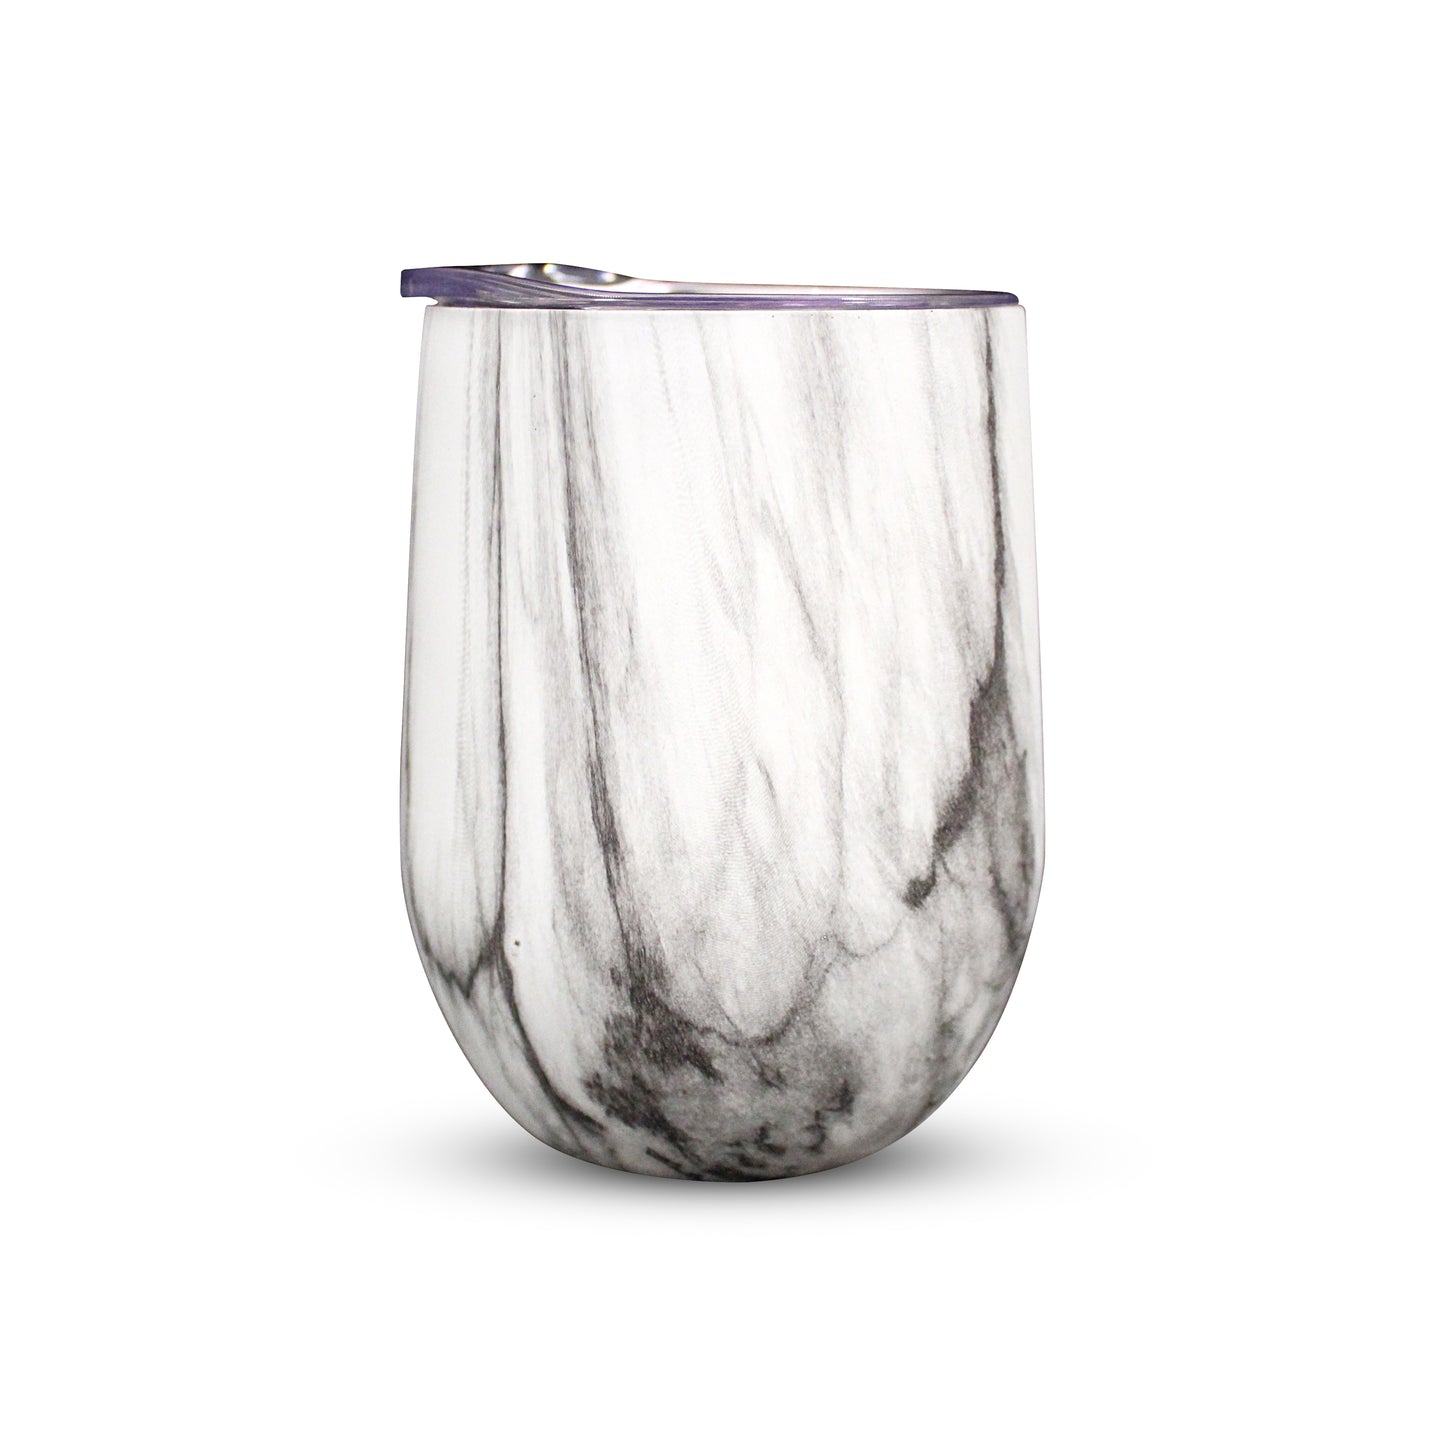 Double Wall Insulated 12oz Wine Tumblers, Set of 2, Marble Print Design